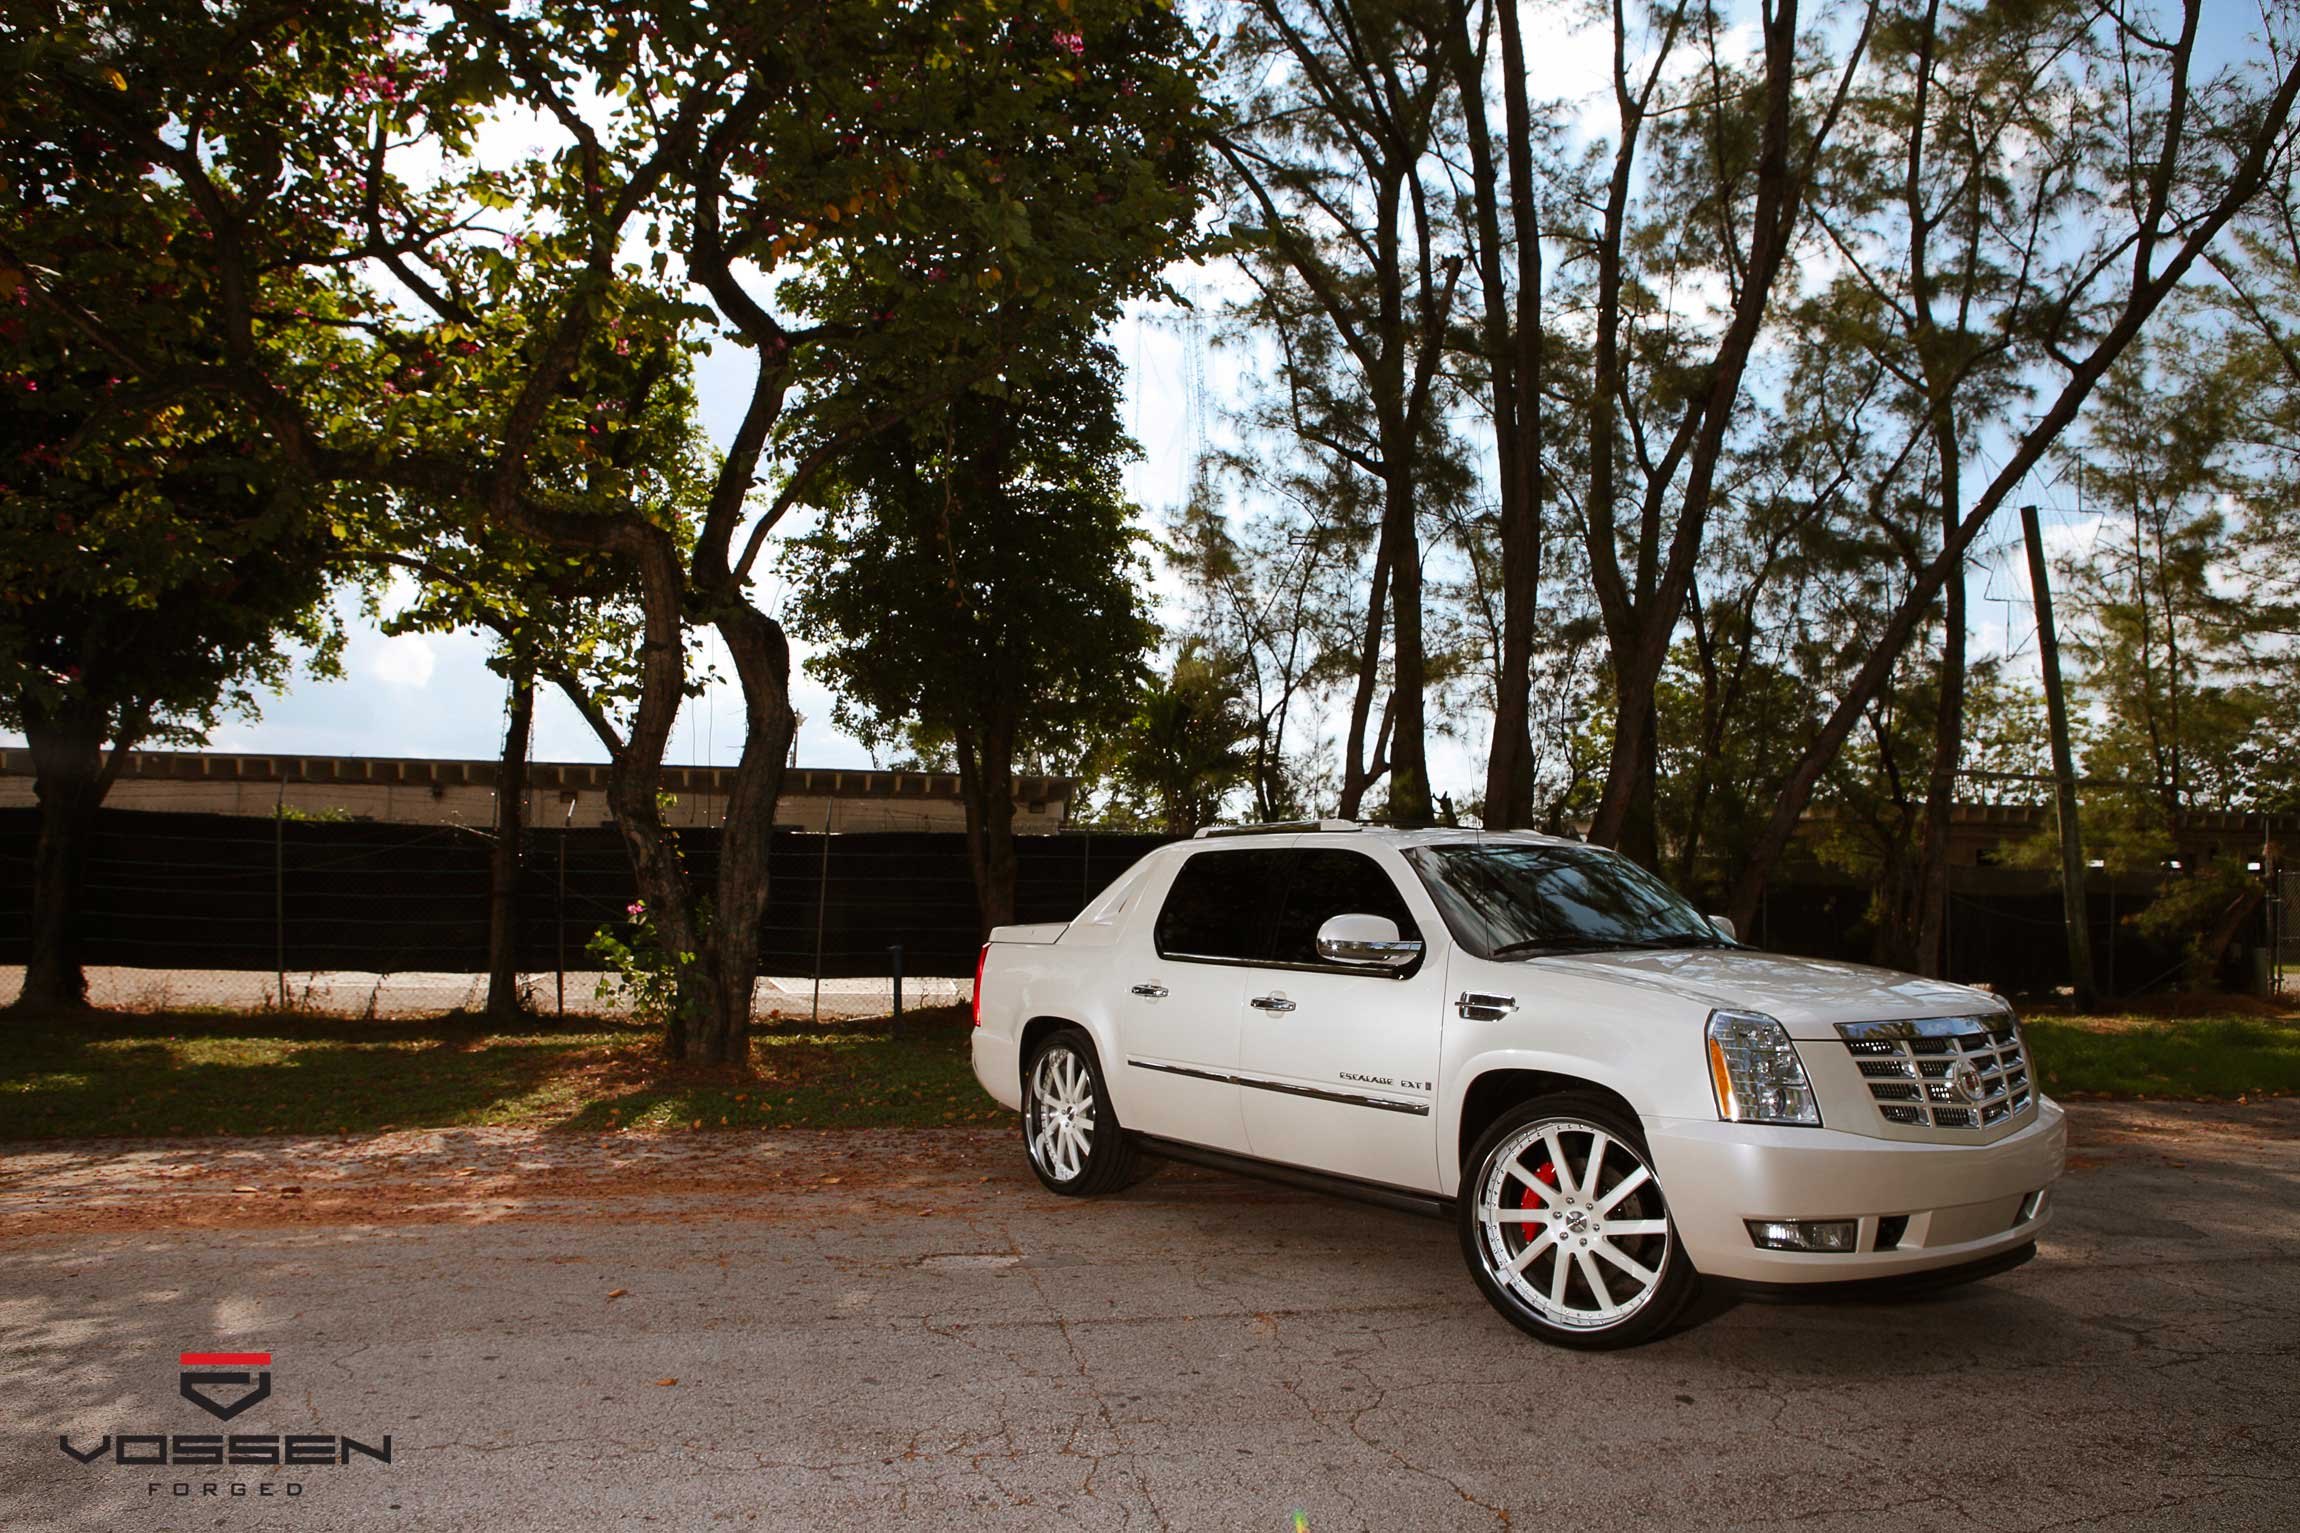 Custom Front Bumper on White Cadillac Escalade - Photo by Vossen